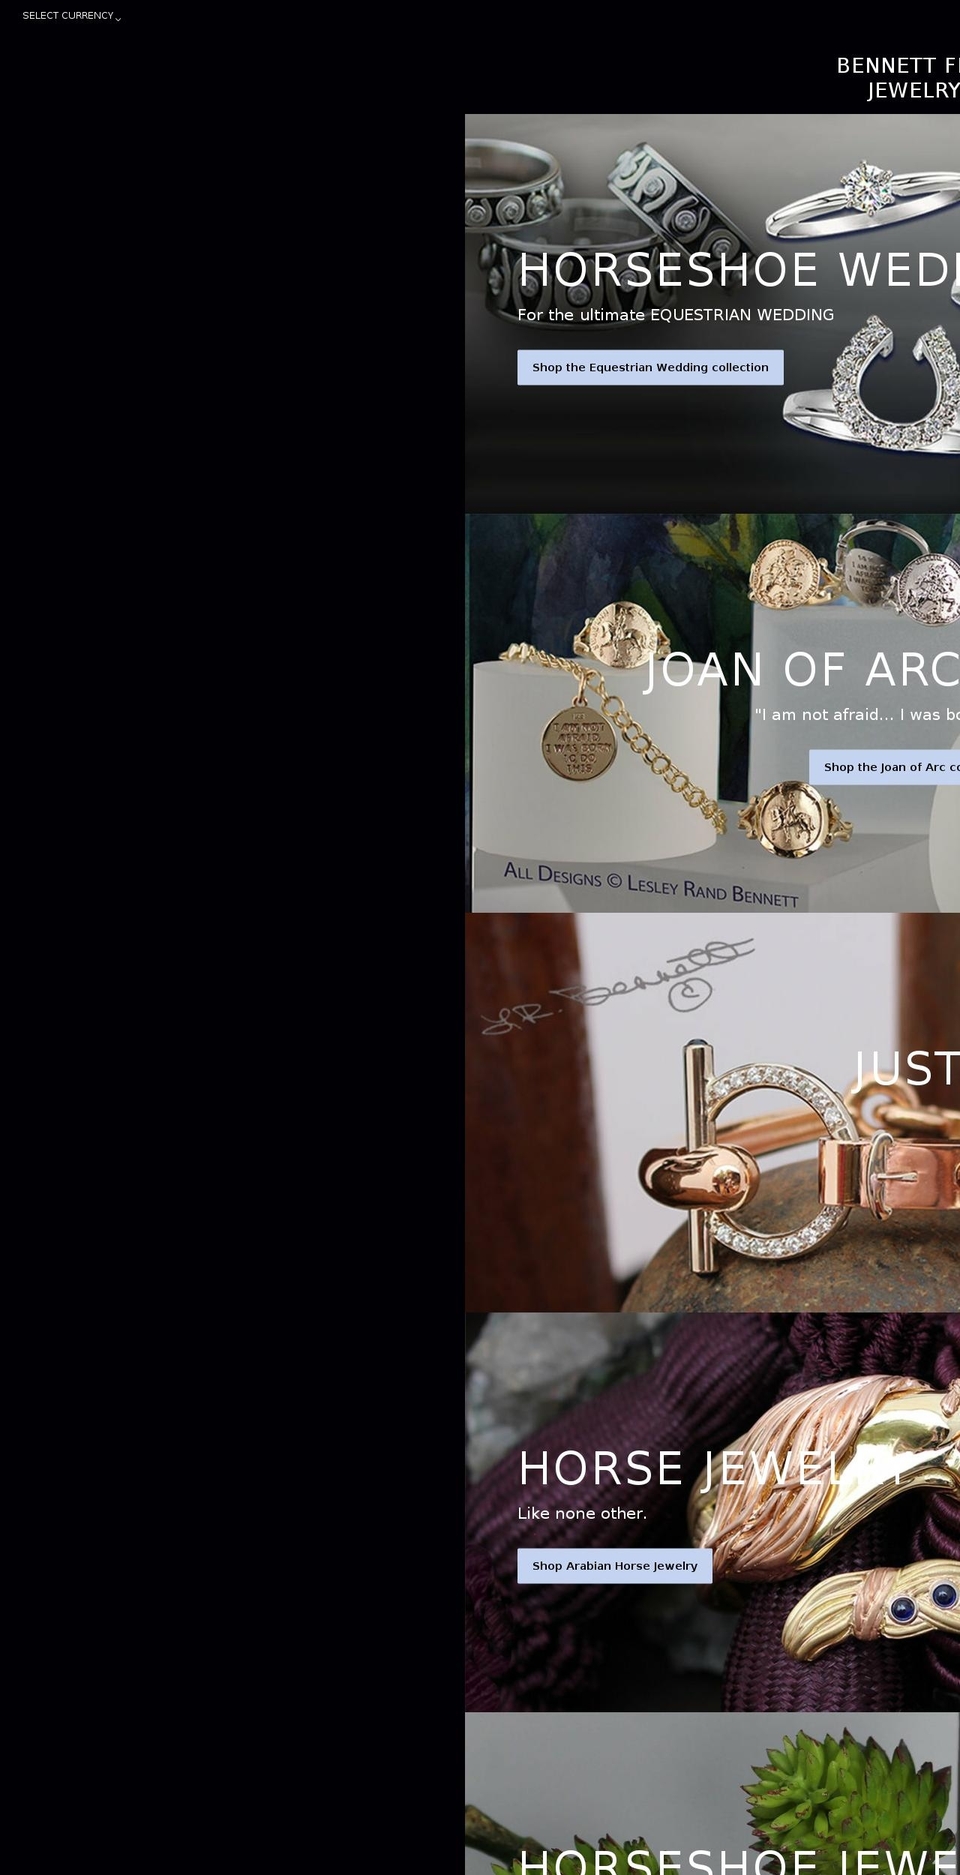 Copy of Grid-most recent Shopify theme site example bennett.jewelry